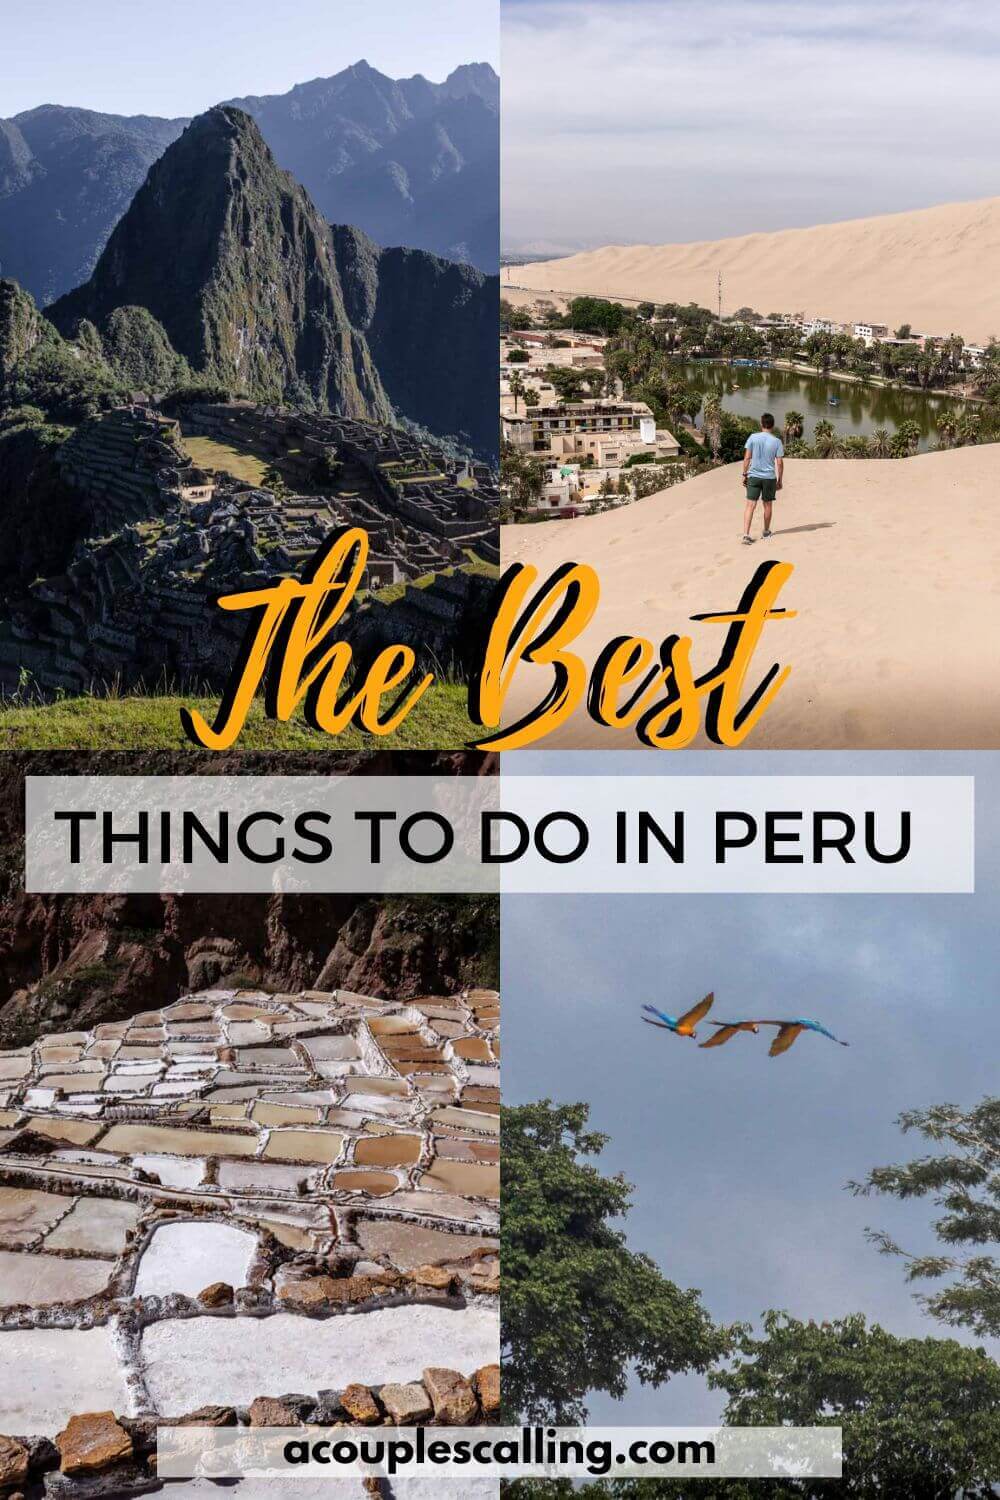 The best things to do in Peru